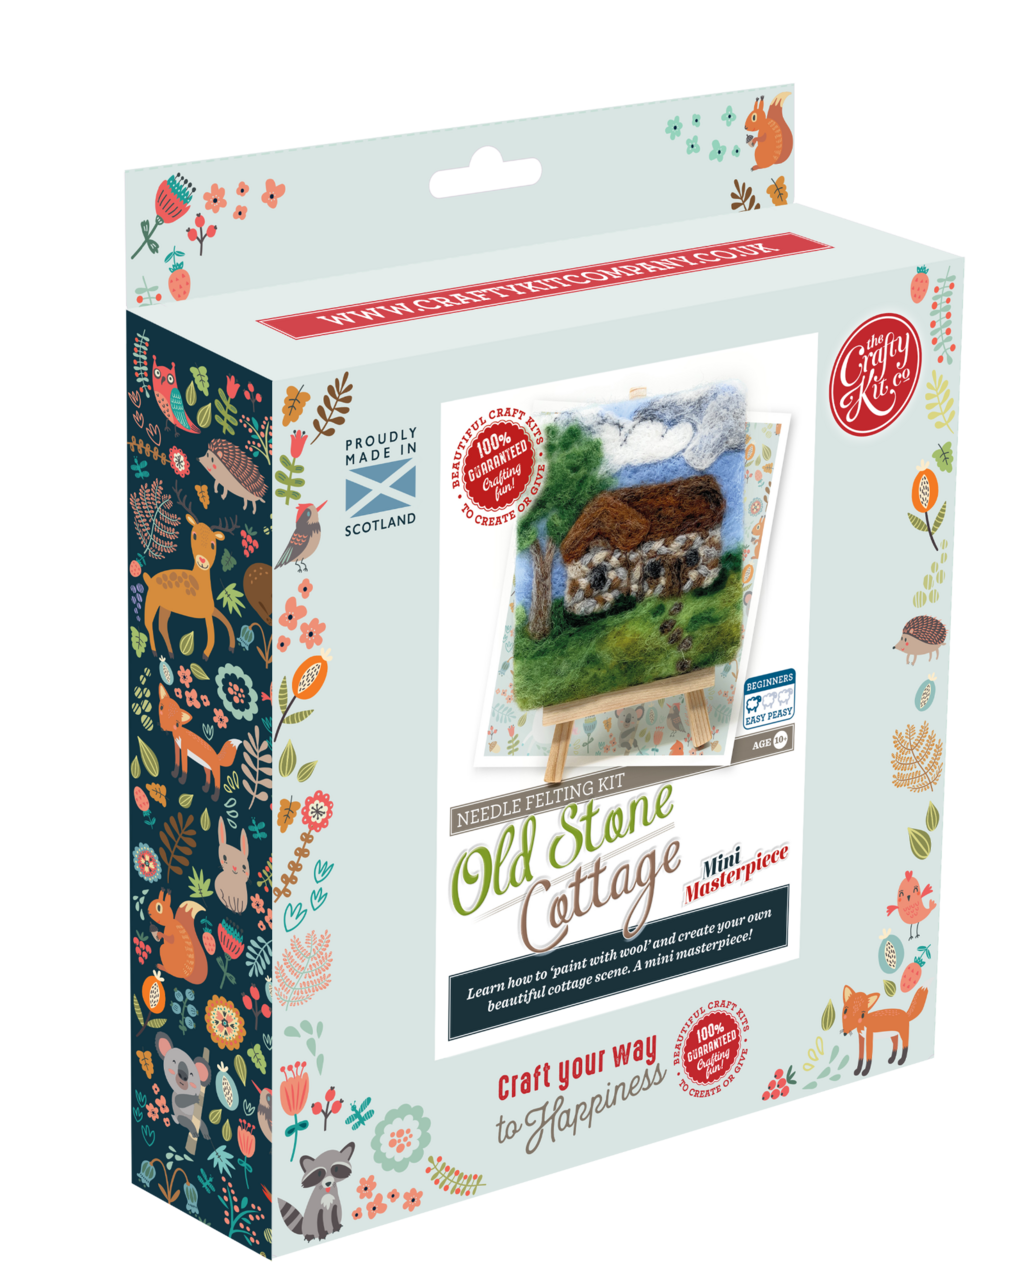 The Crafty Kit Company - Paint with Wool:Mini Masterpiece Old Stone Cottage Craft Kit